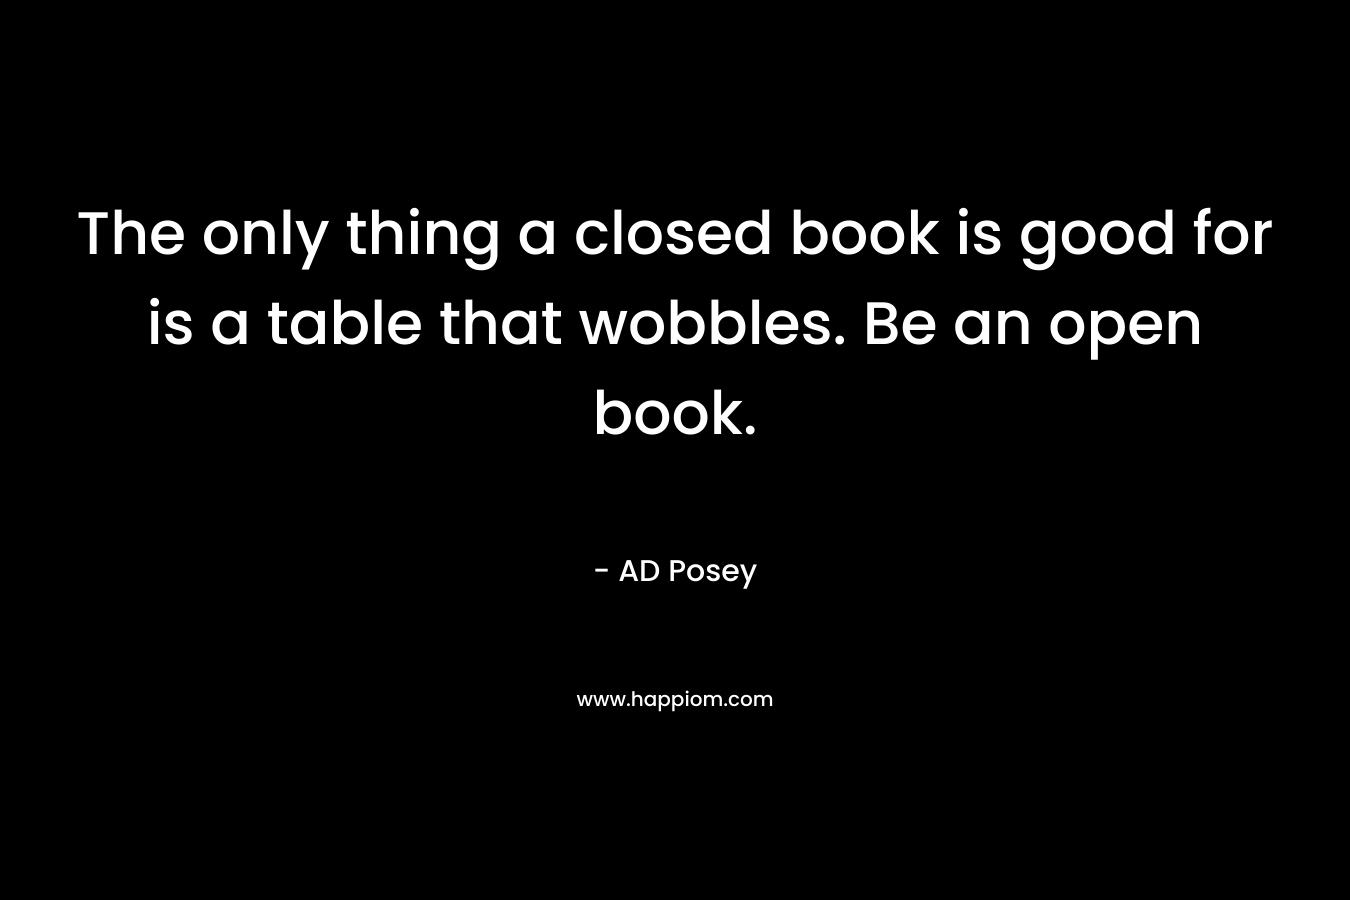 The only thing a closed book is good for is a table that wobbles. Be an open book.